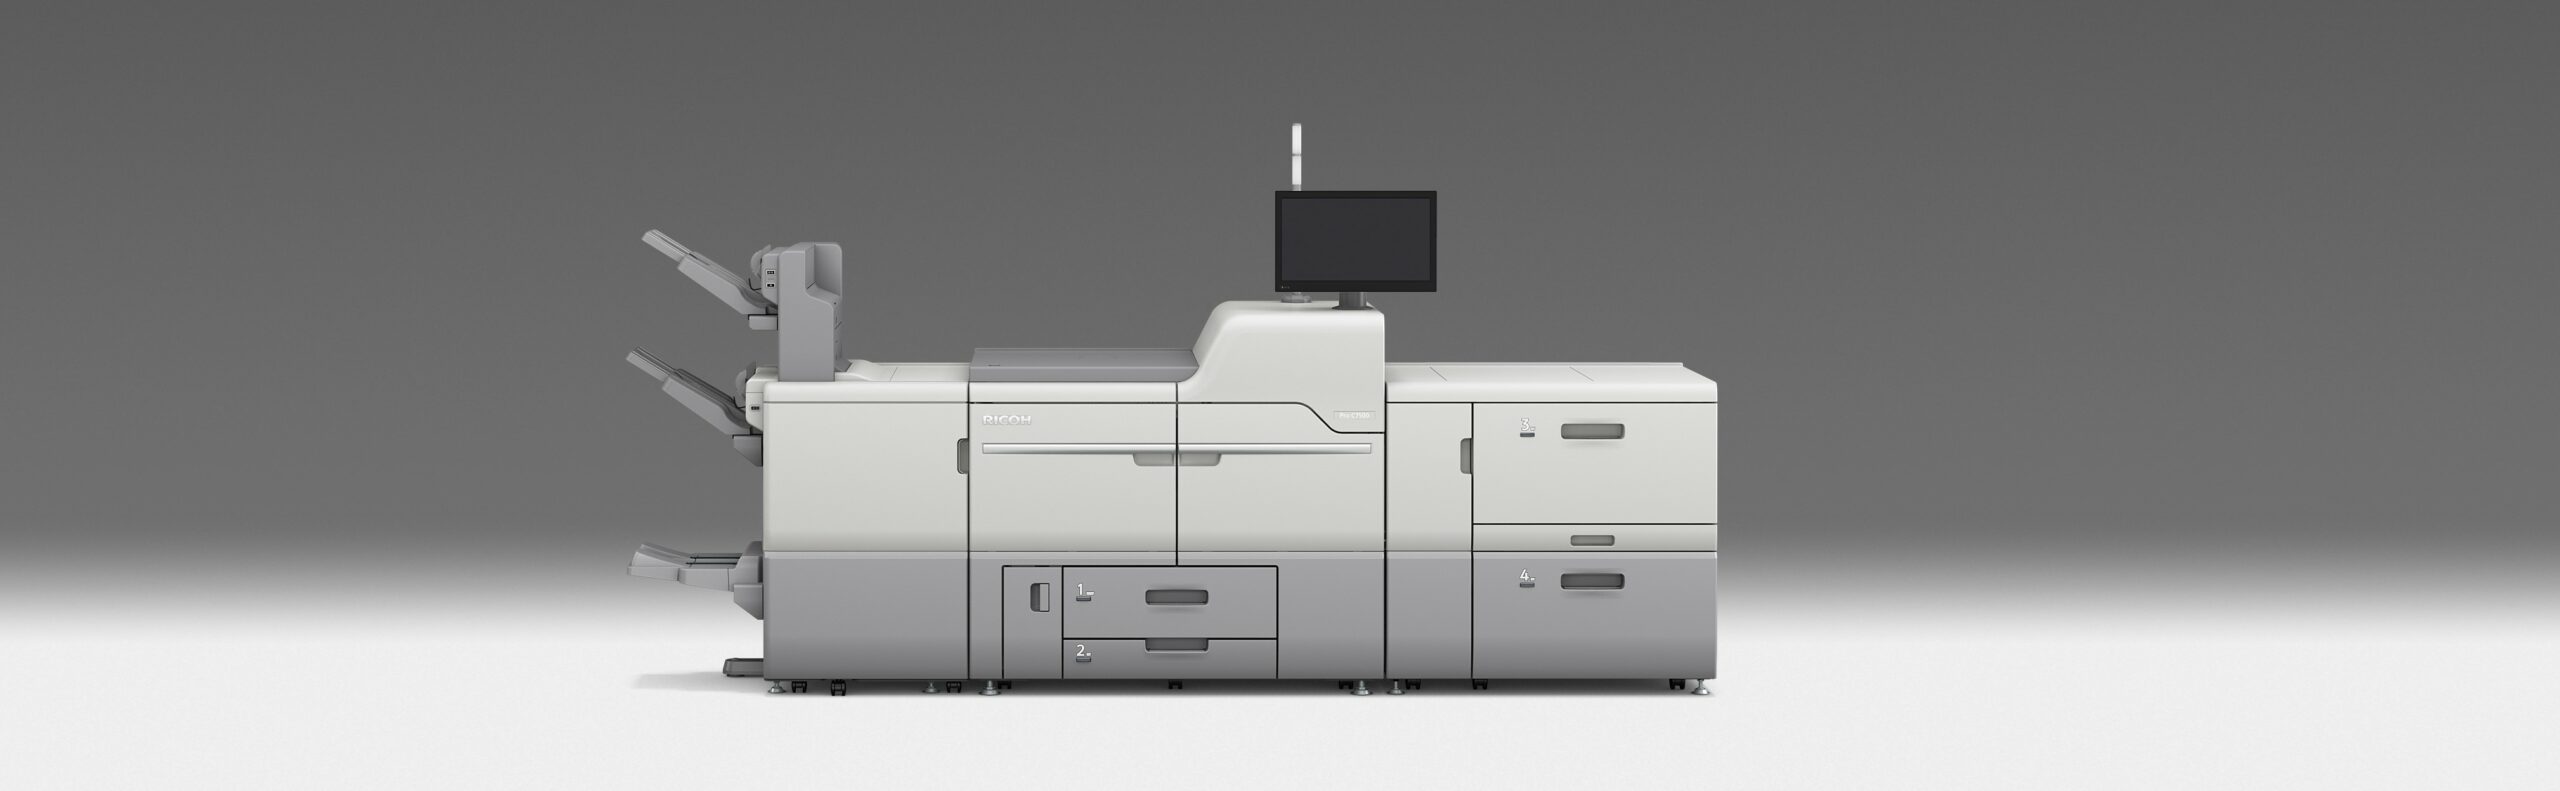 RICOH Pro C7500 Digital Color Press Enables Print Service Providers to Expand Application Creativity